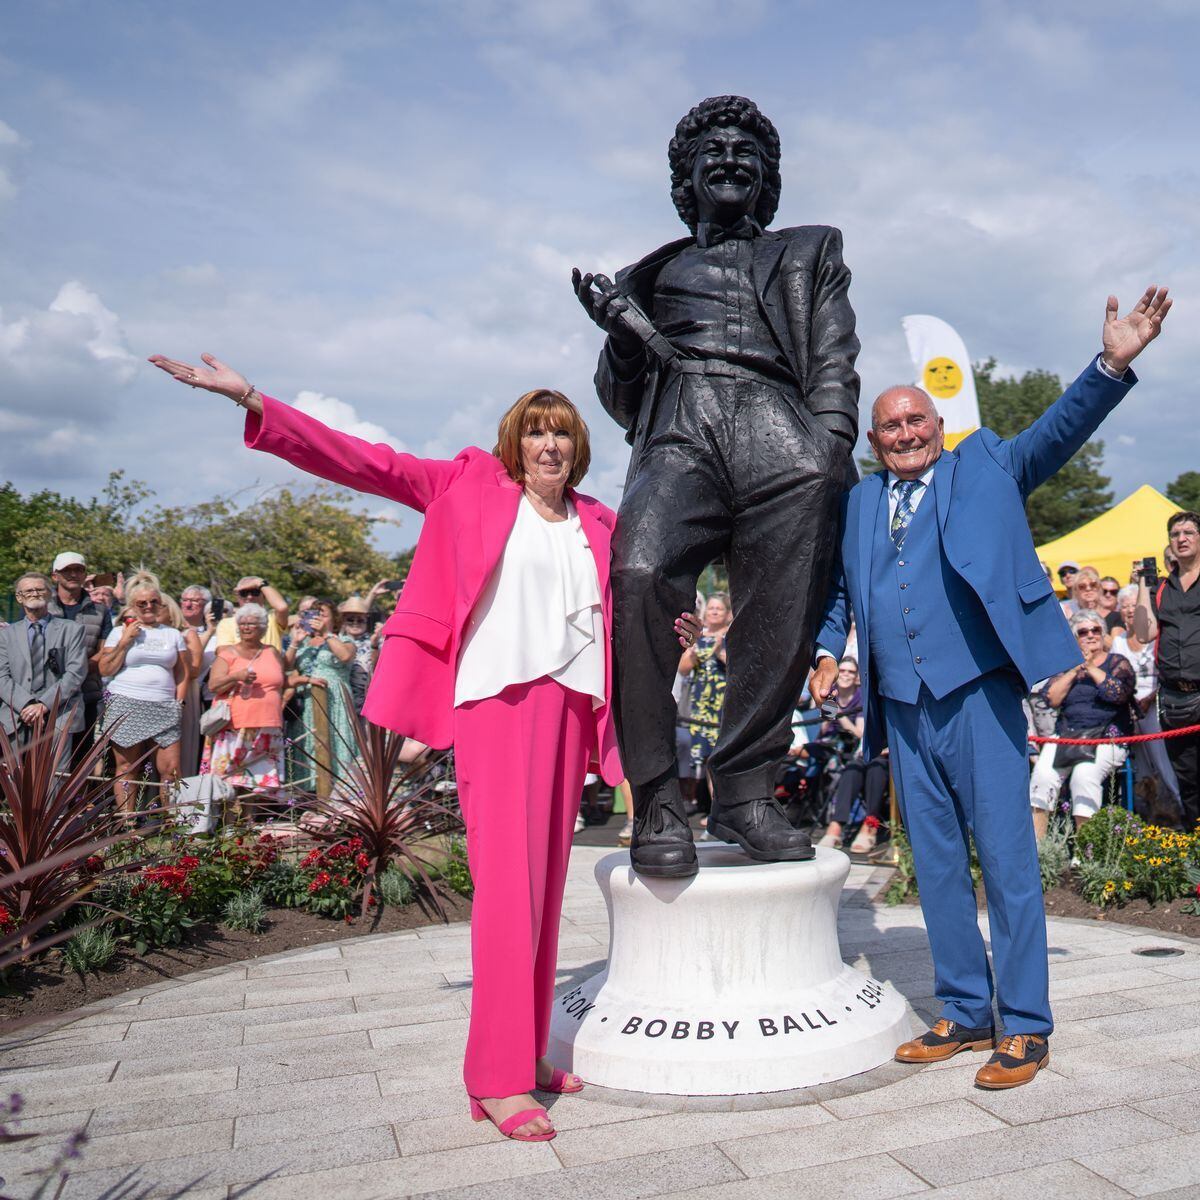 The statue dedicated to Bobby Ball. 